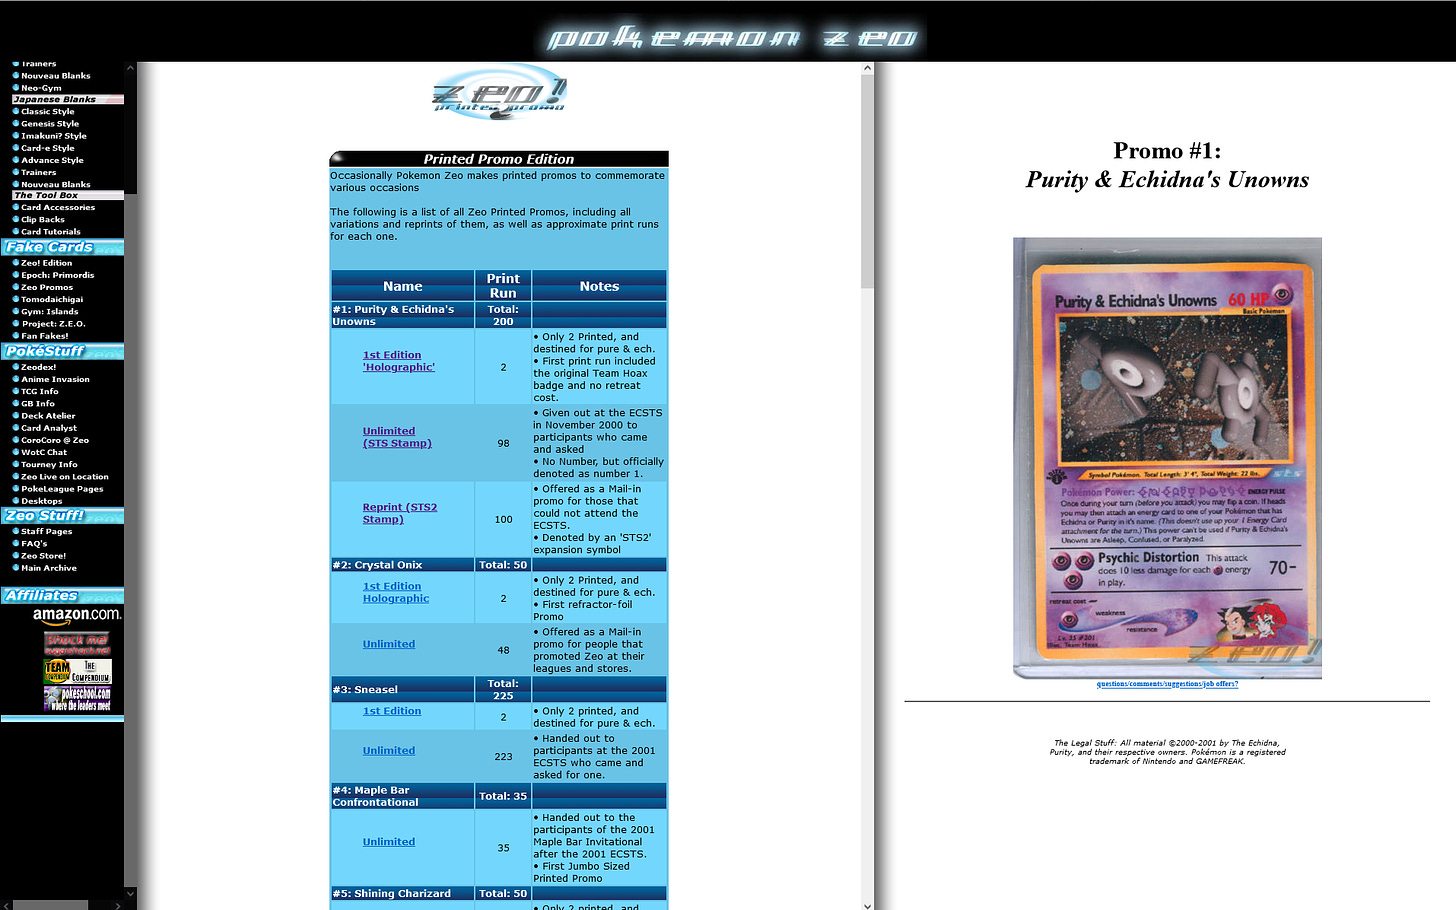 The Printed Promo Edition page on the Pokémon Zeo! website